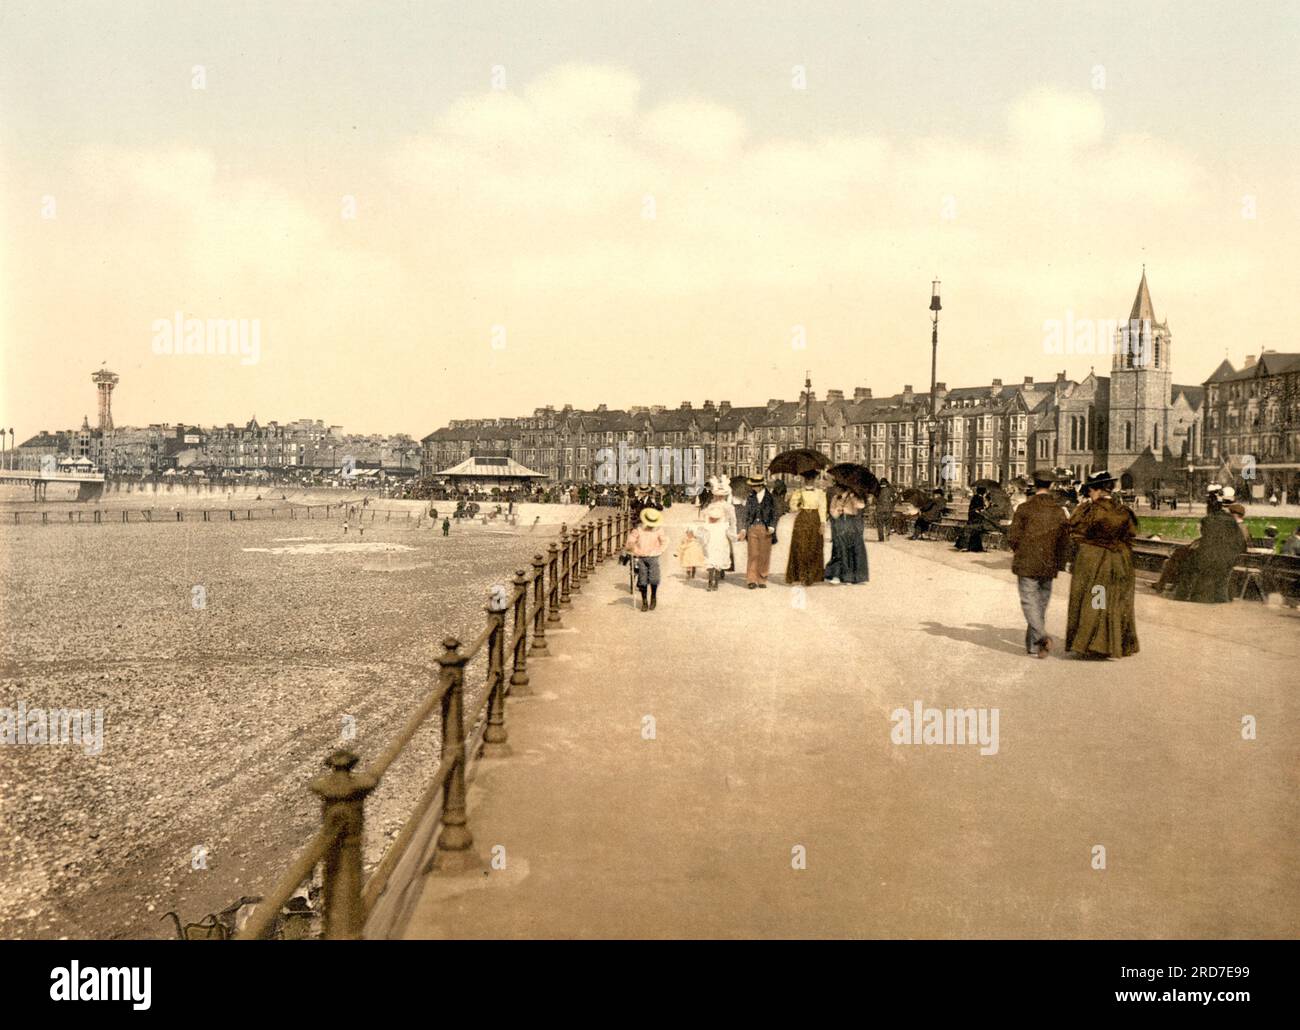 Parade looking east, Morecambe, a seaside town and civil parish in the City of Lancaster, England, 1895, Historical, digital improved reproduction of an old Photochrome print Stock Photo